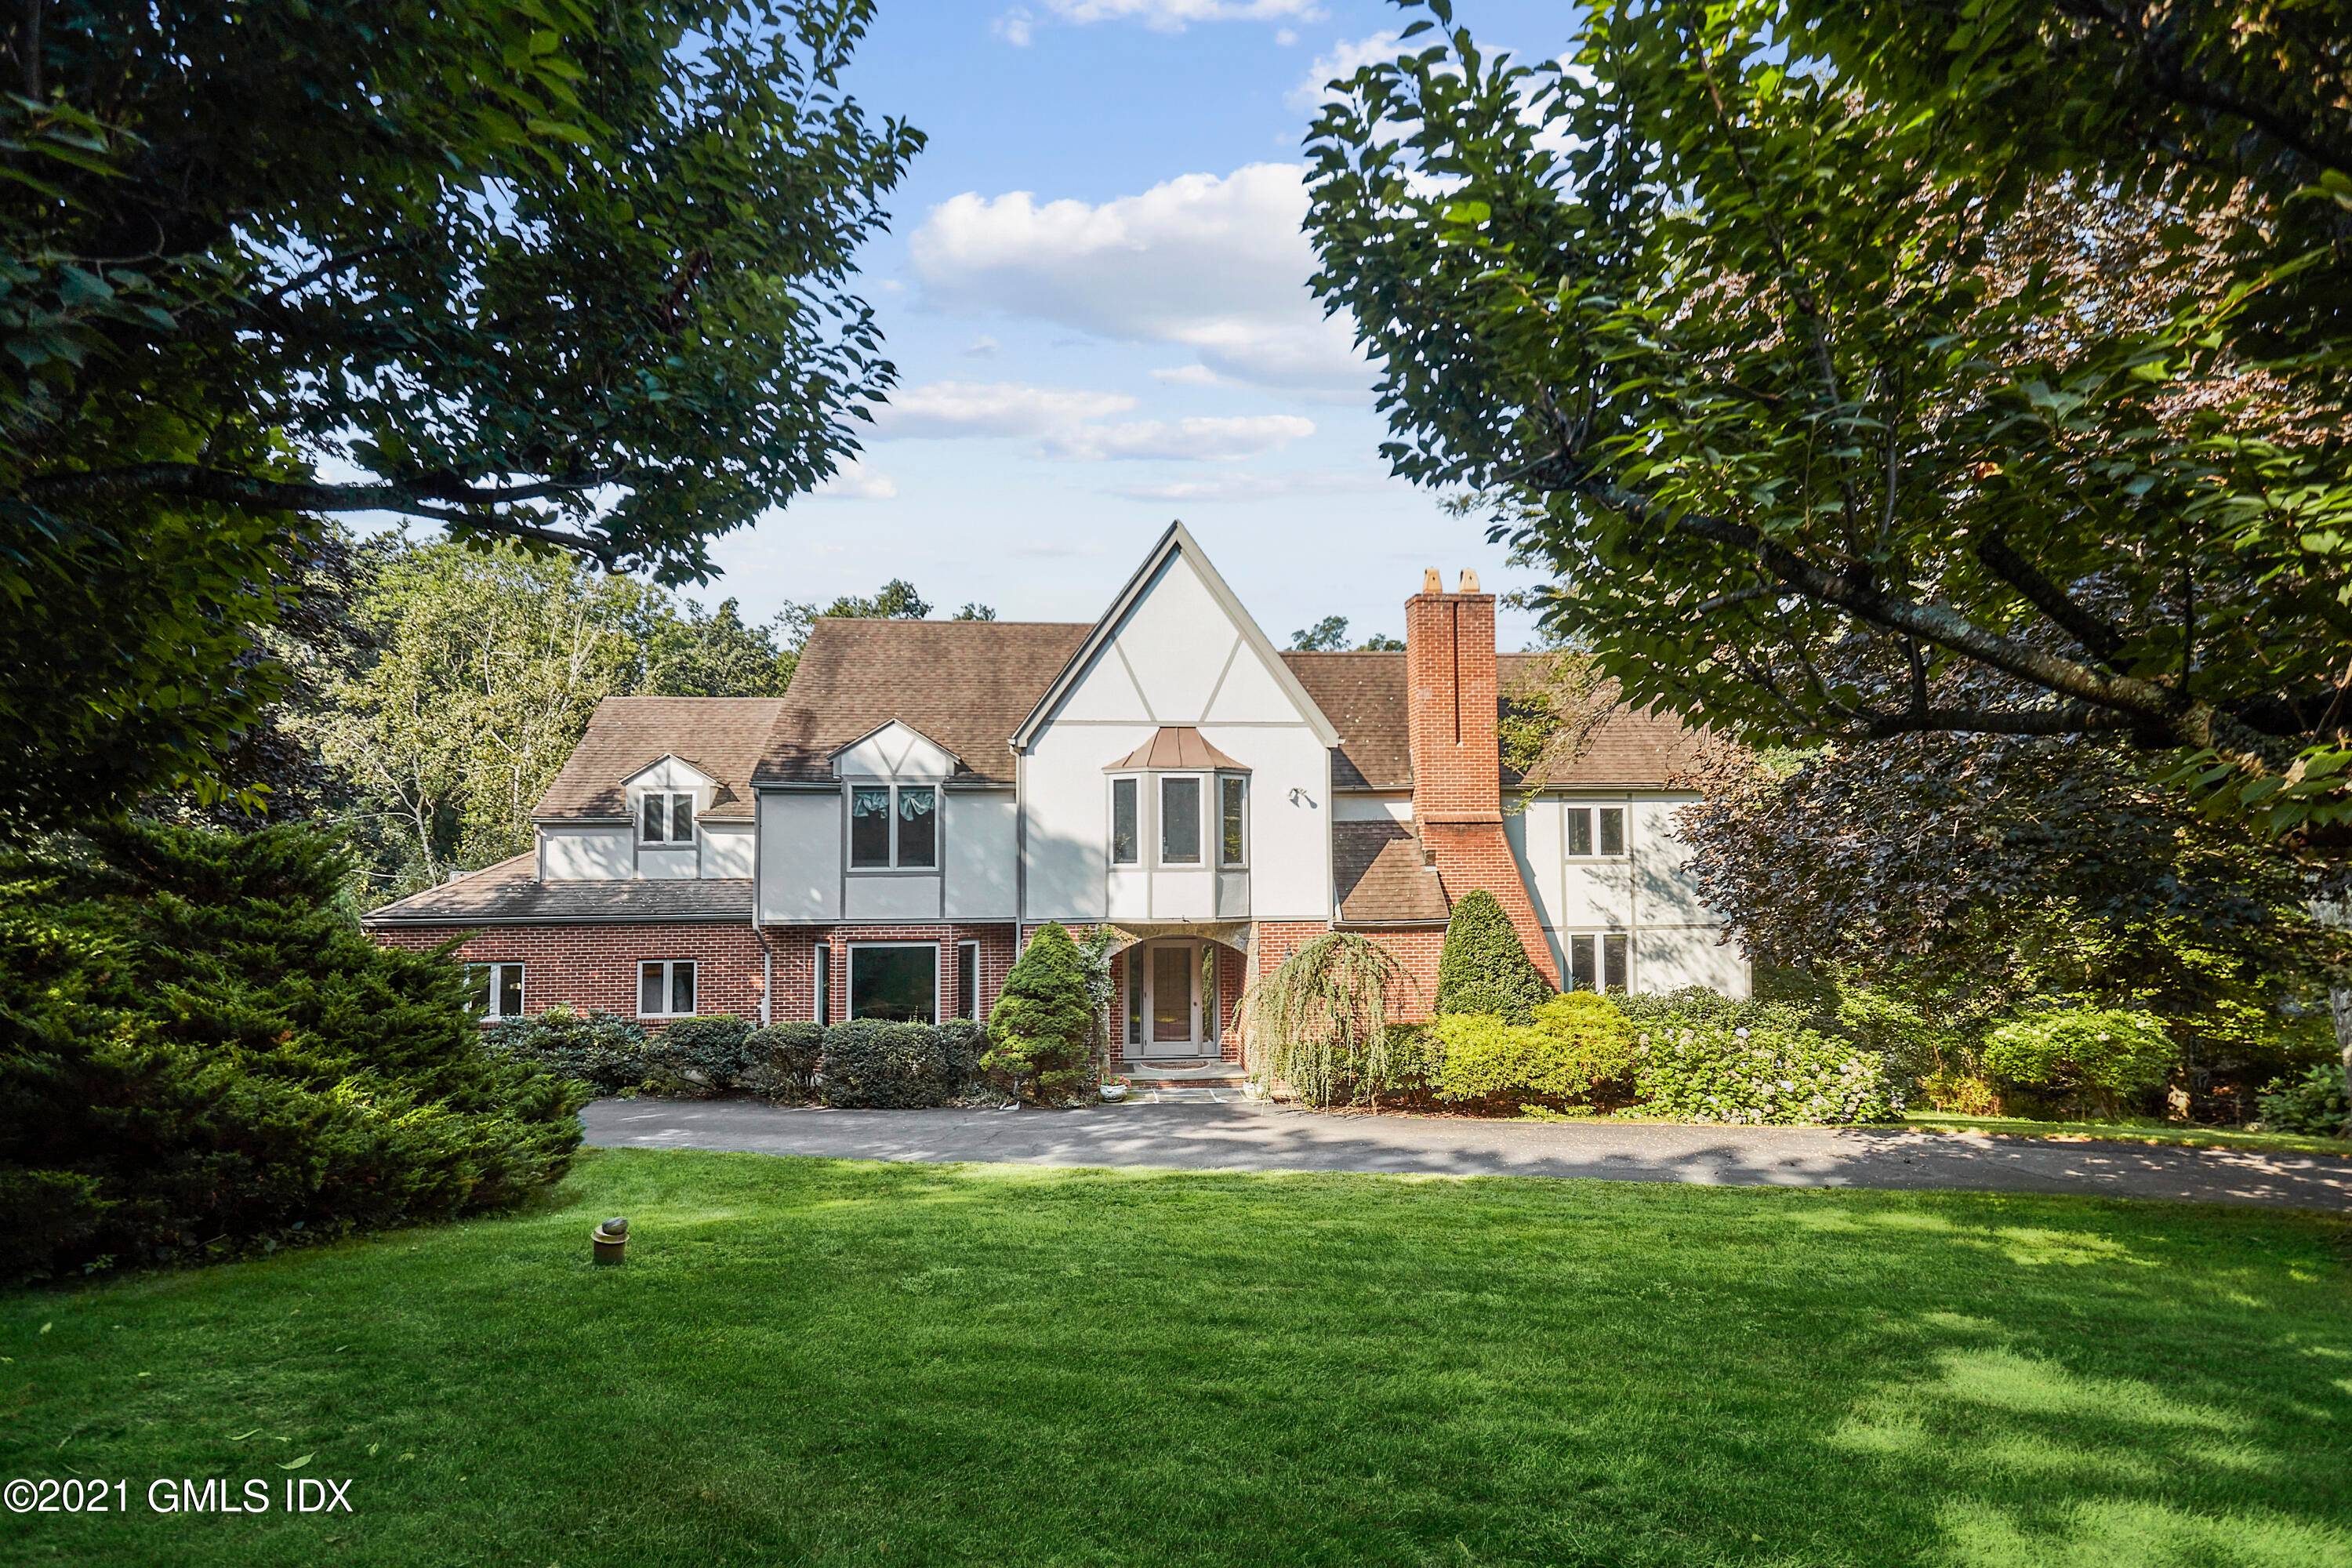 Stunning sunny 5 BR Tudor situated on quiet road adjacent to Mianus River Park with access to miles of trails.